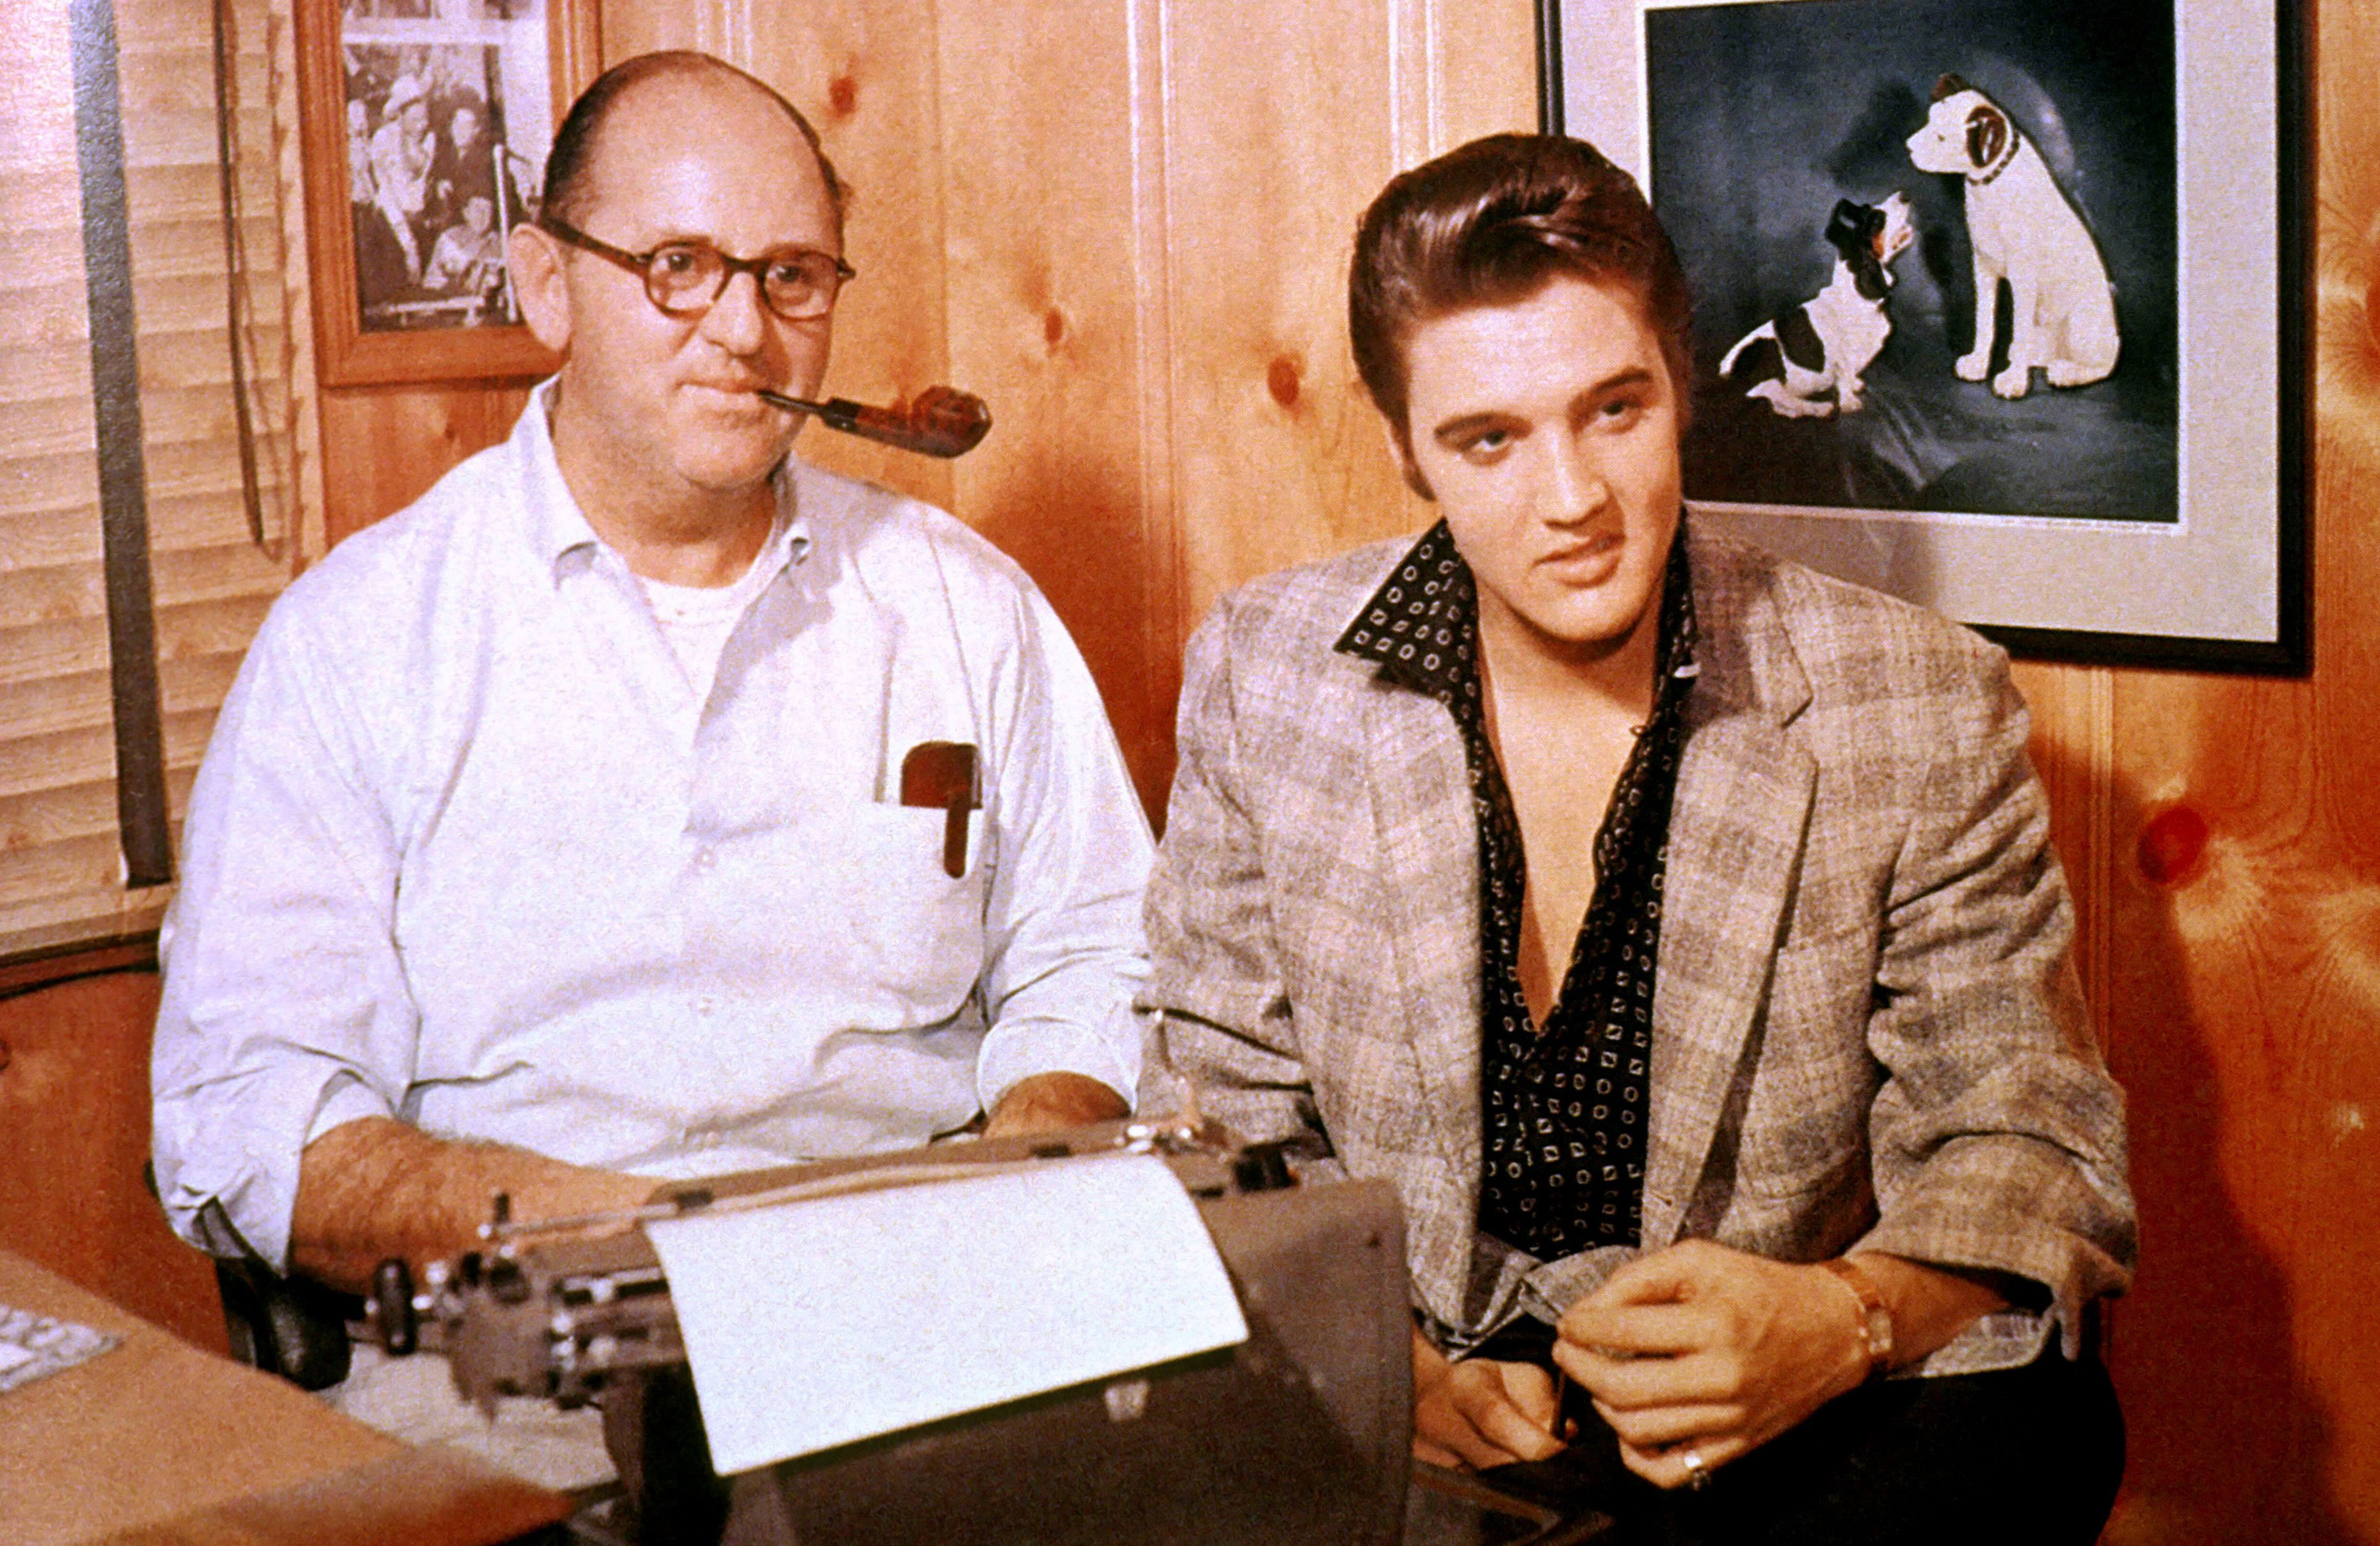 Colonel Tom Parker and Elvis Presley in October 1955 signing a record contract with RCA Victor. *** USA ONLY *** © Glenn A. Baker / Redferns / Retna Ltd